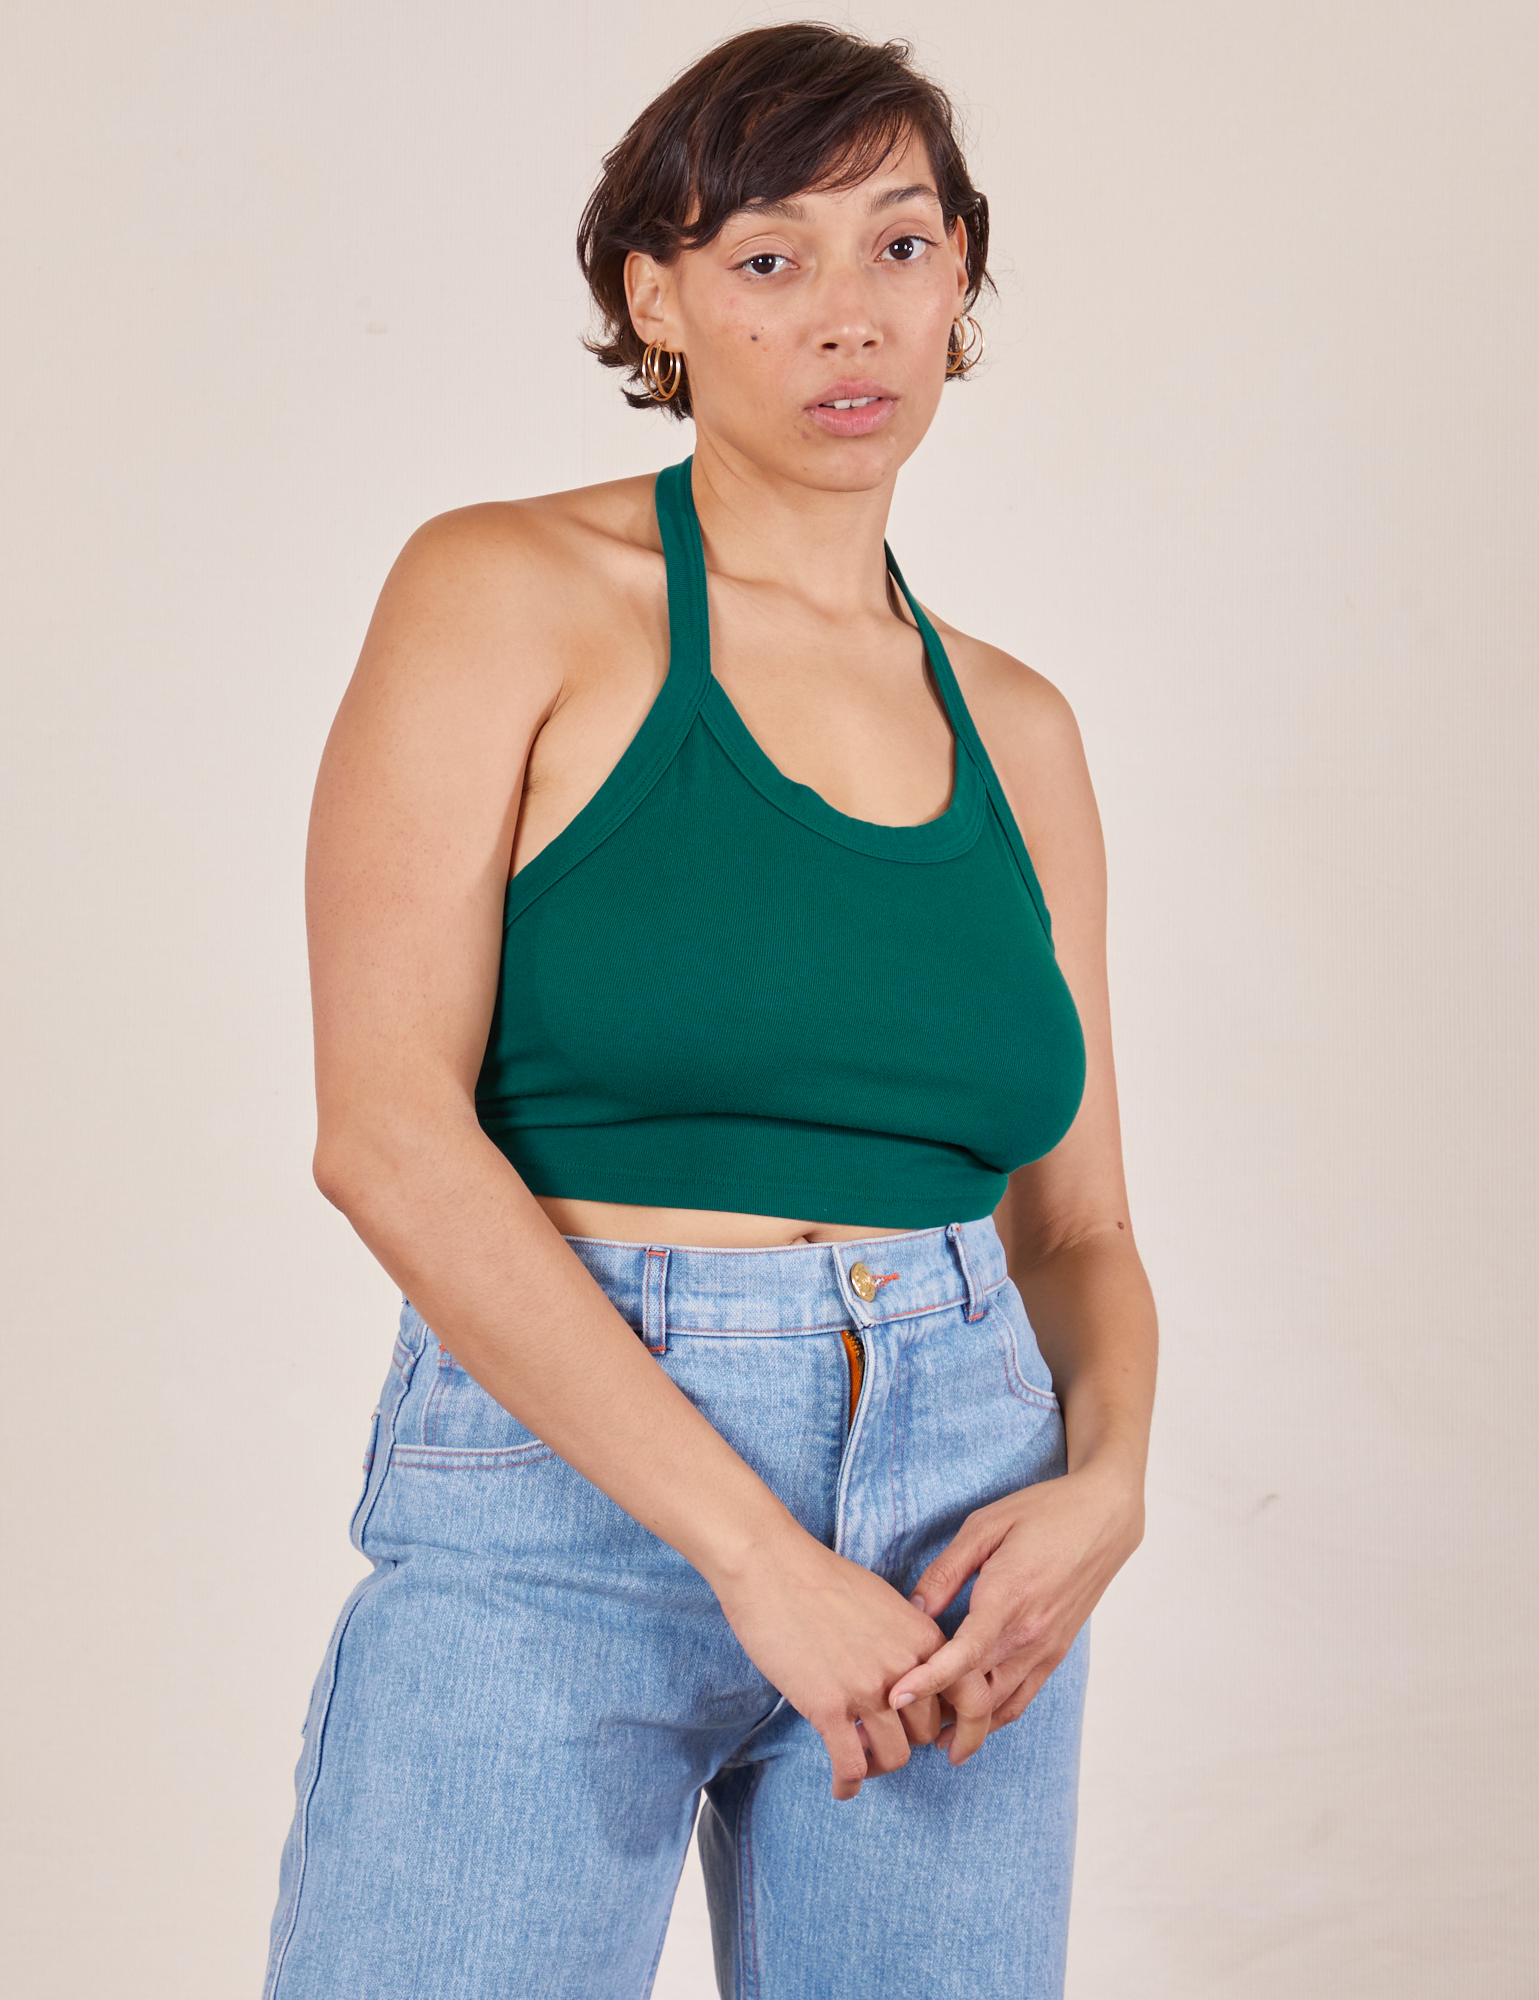 Tiara is 5&#39;4&quot; and wearing XS Halter Top in Hunter Green paired with light wash Sailor Jeans